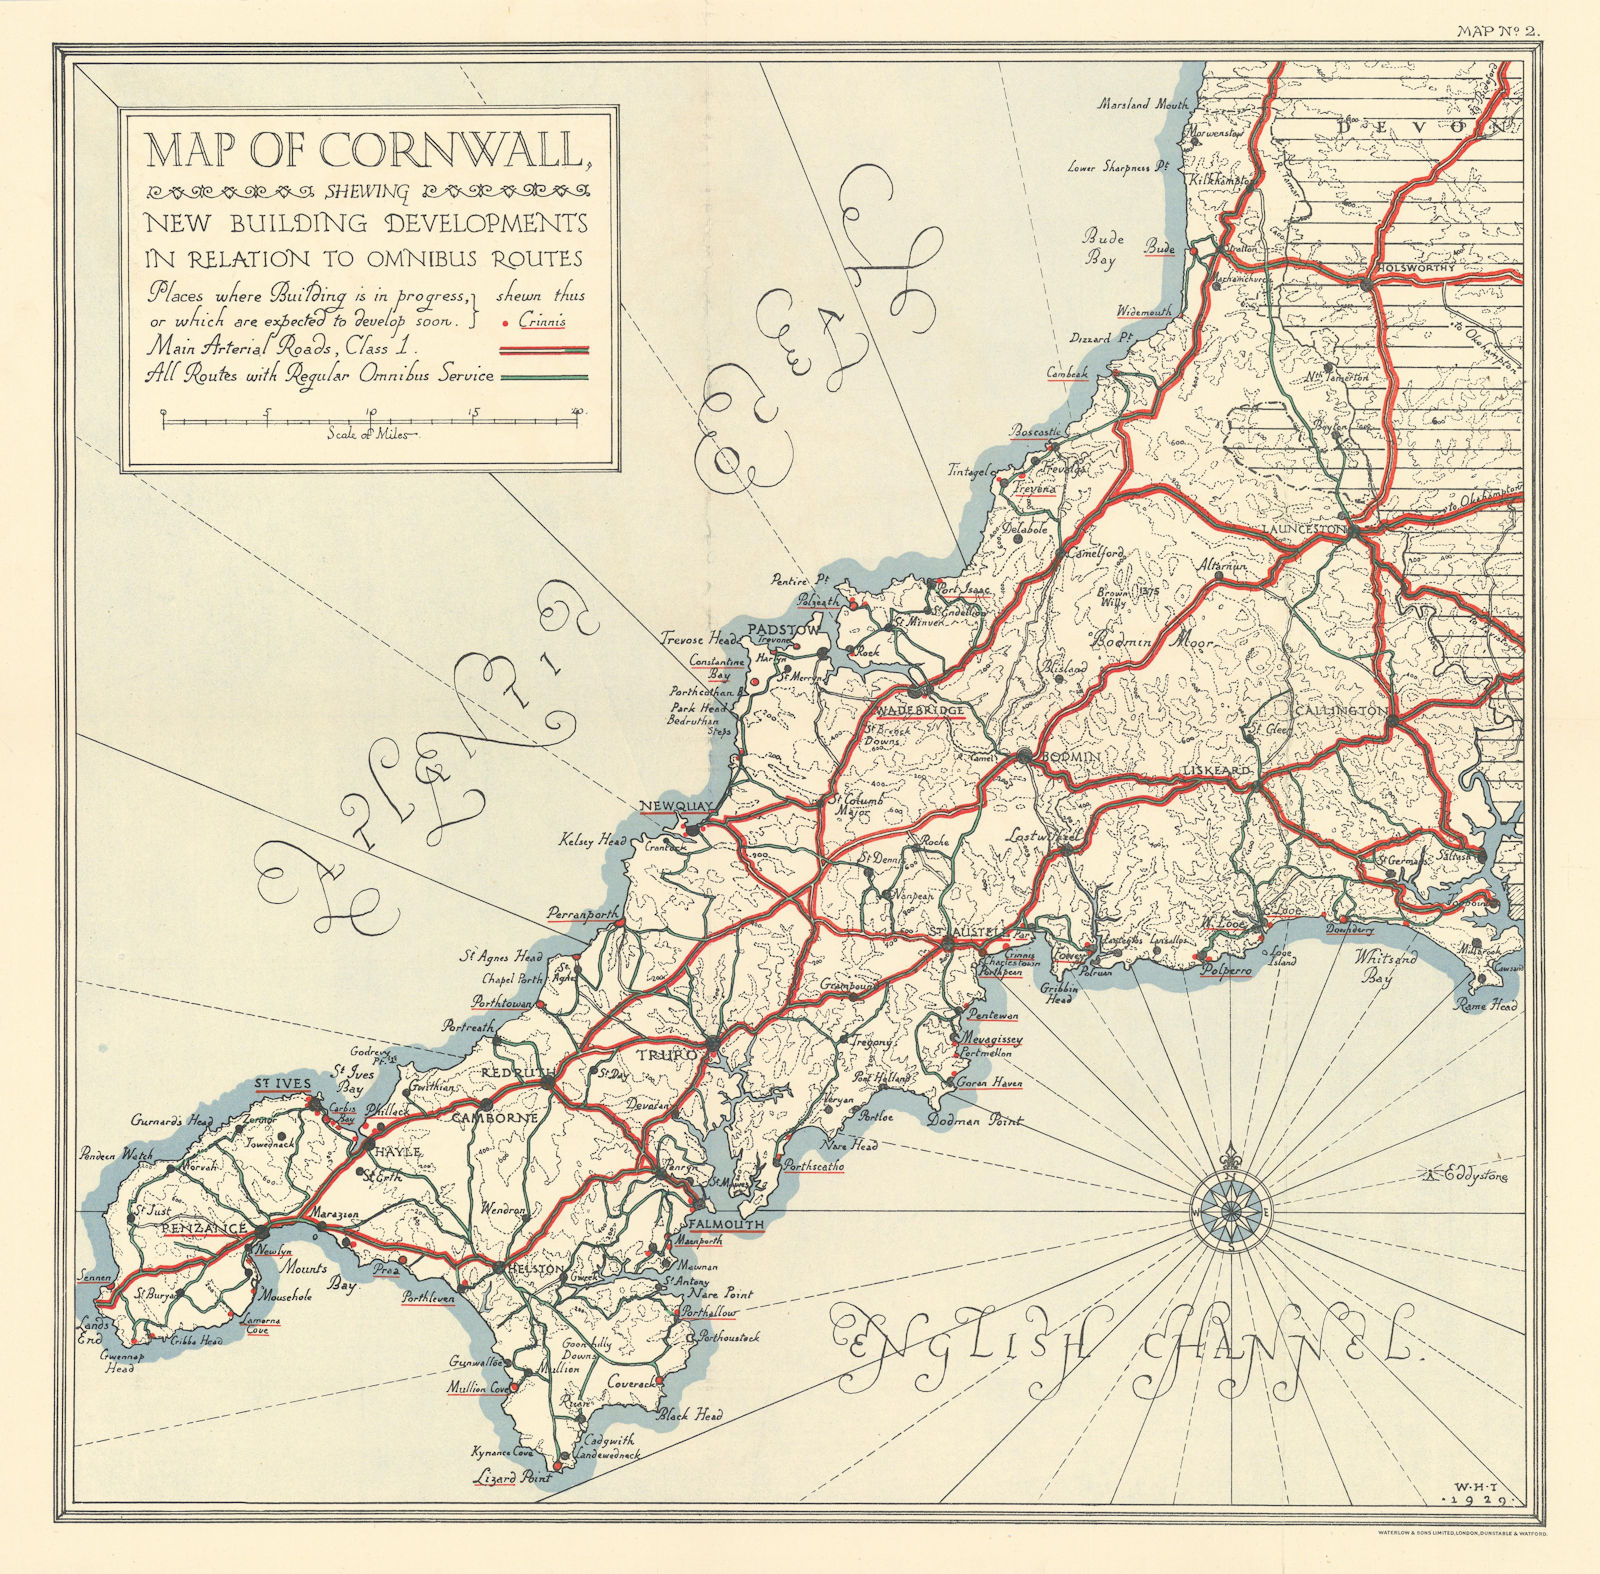 CORNWALL. New building developments & bus routes. HARDING THOMPSON 1930 map